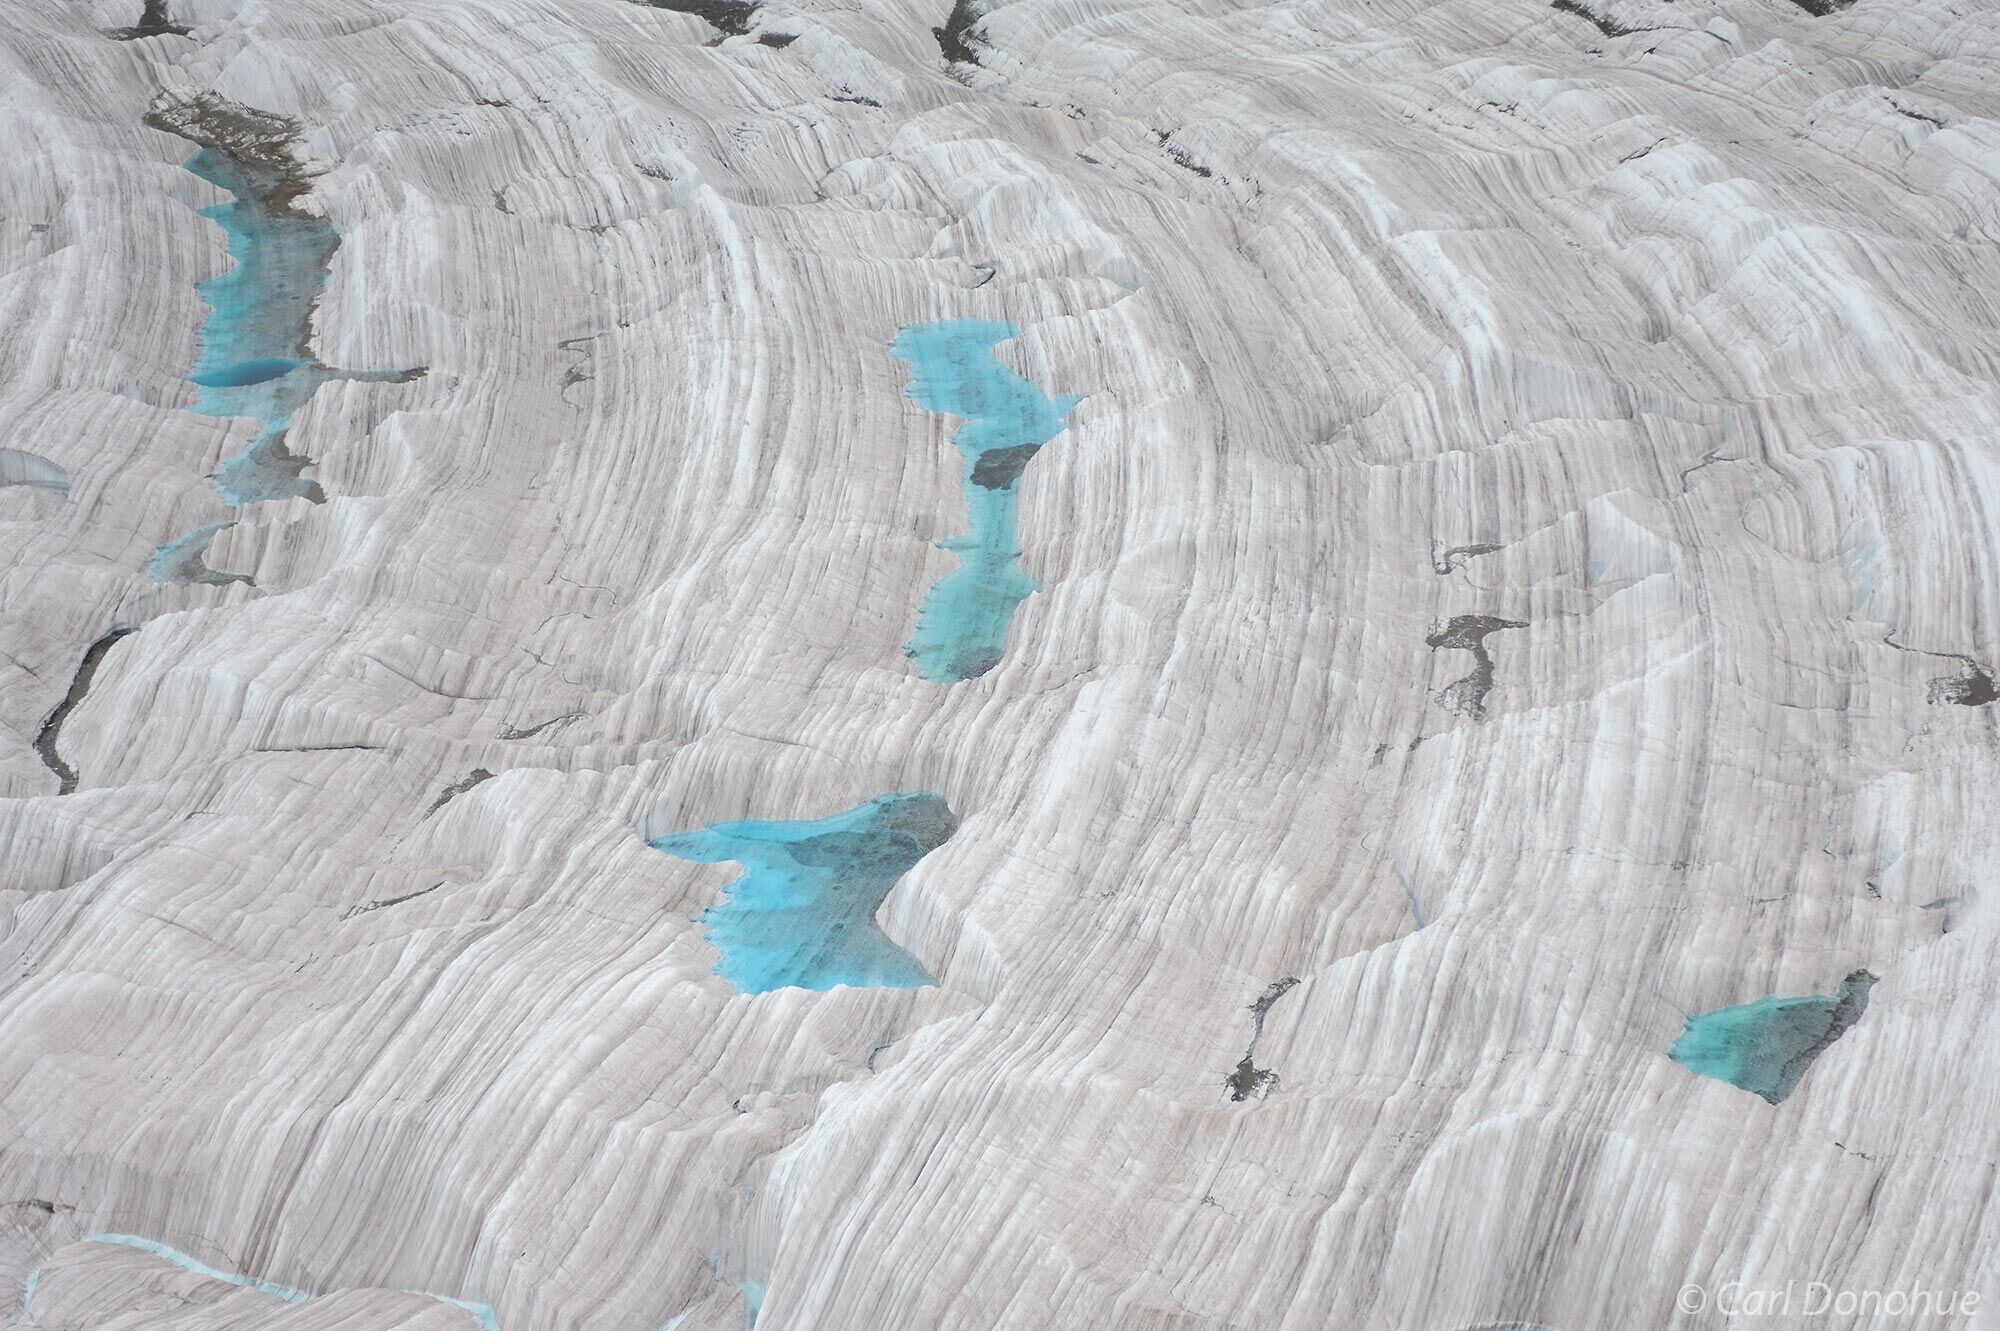 Small turquoise ponds, or tarns, dot the surface of Root Glacier, near Kennicott Glacier, Wrangell - St. Elias National Park...